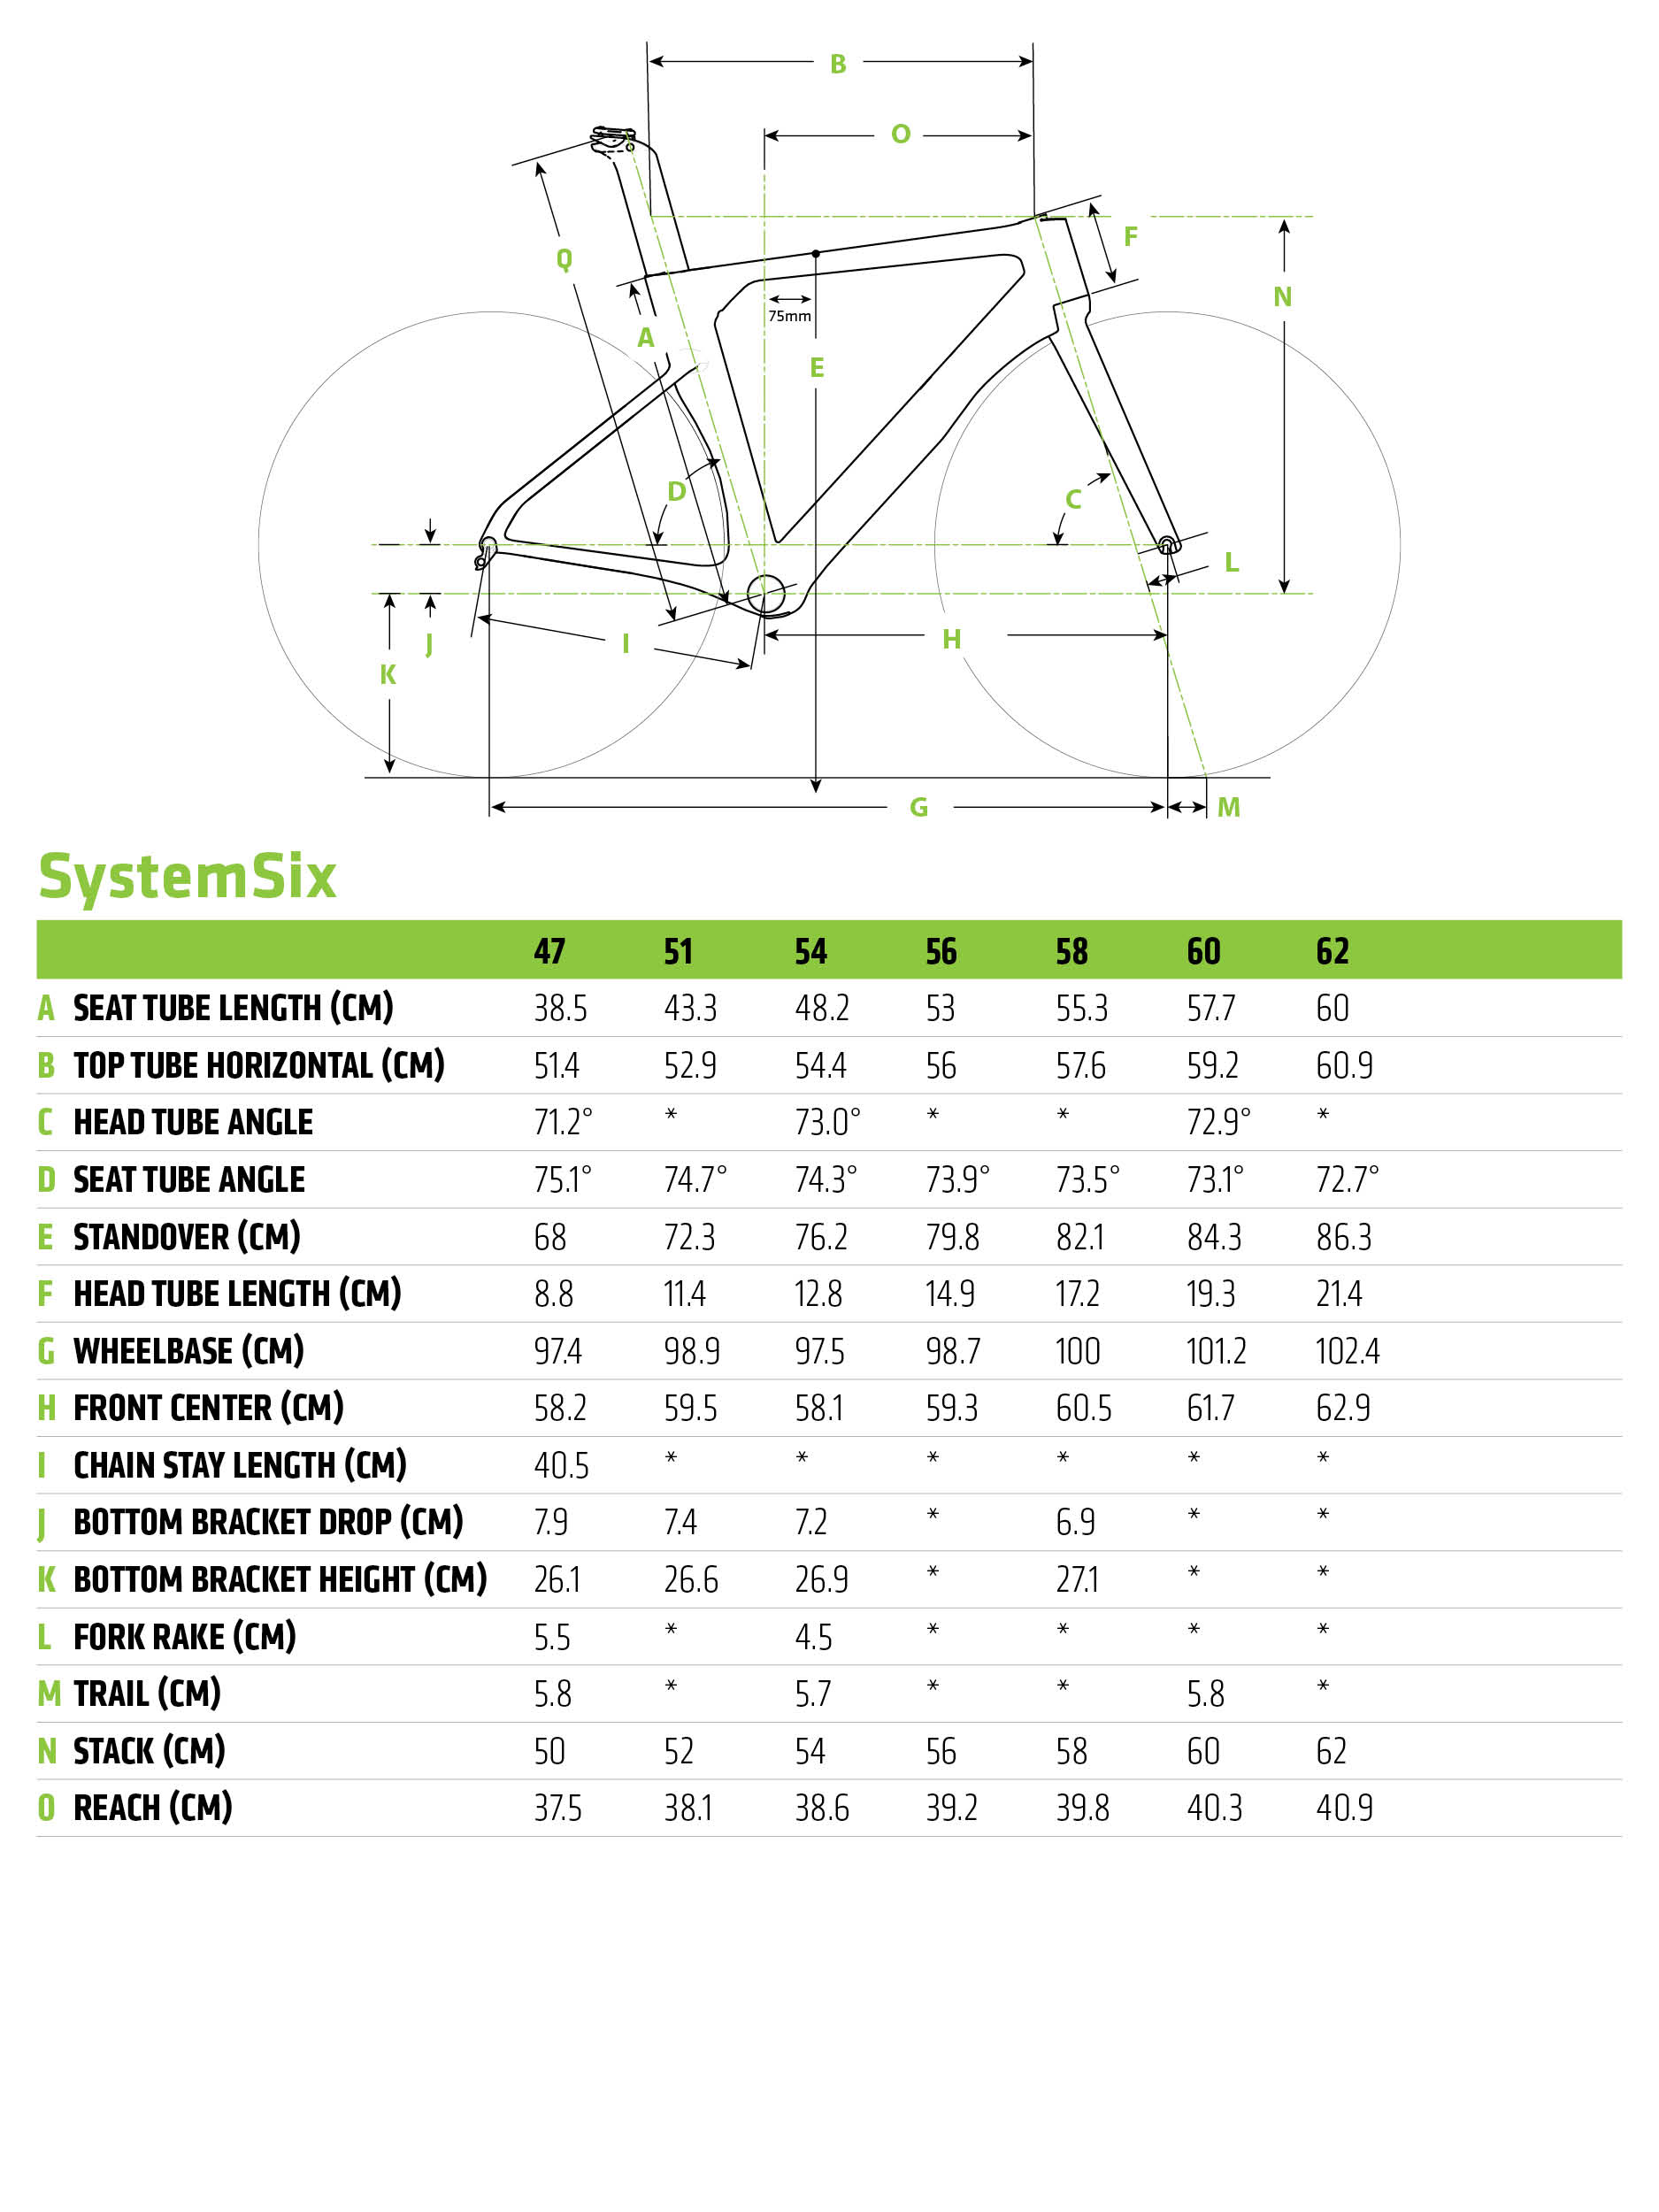 Cannondale SystemSix geometry chart